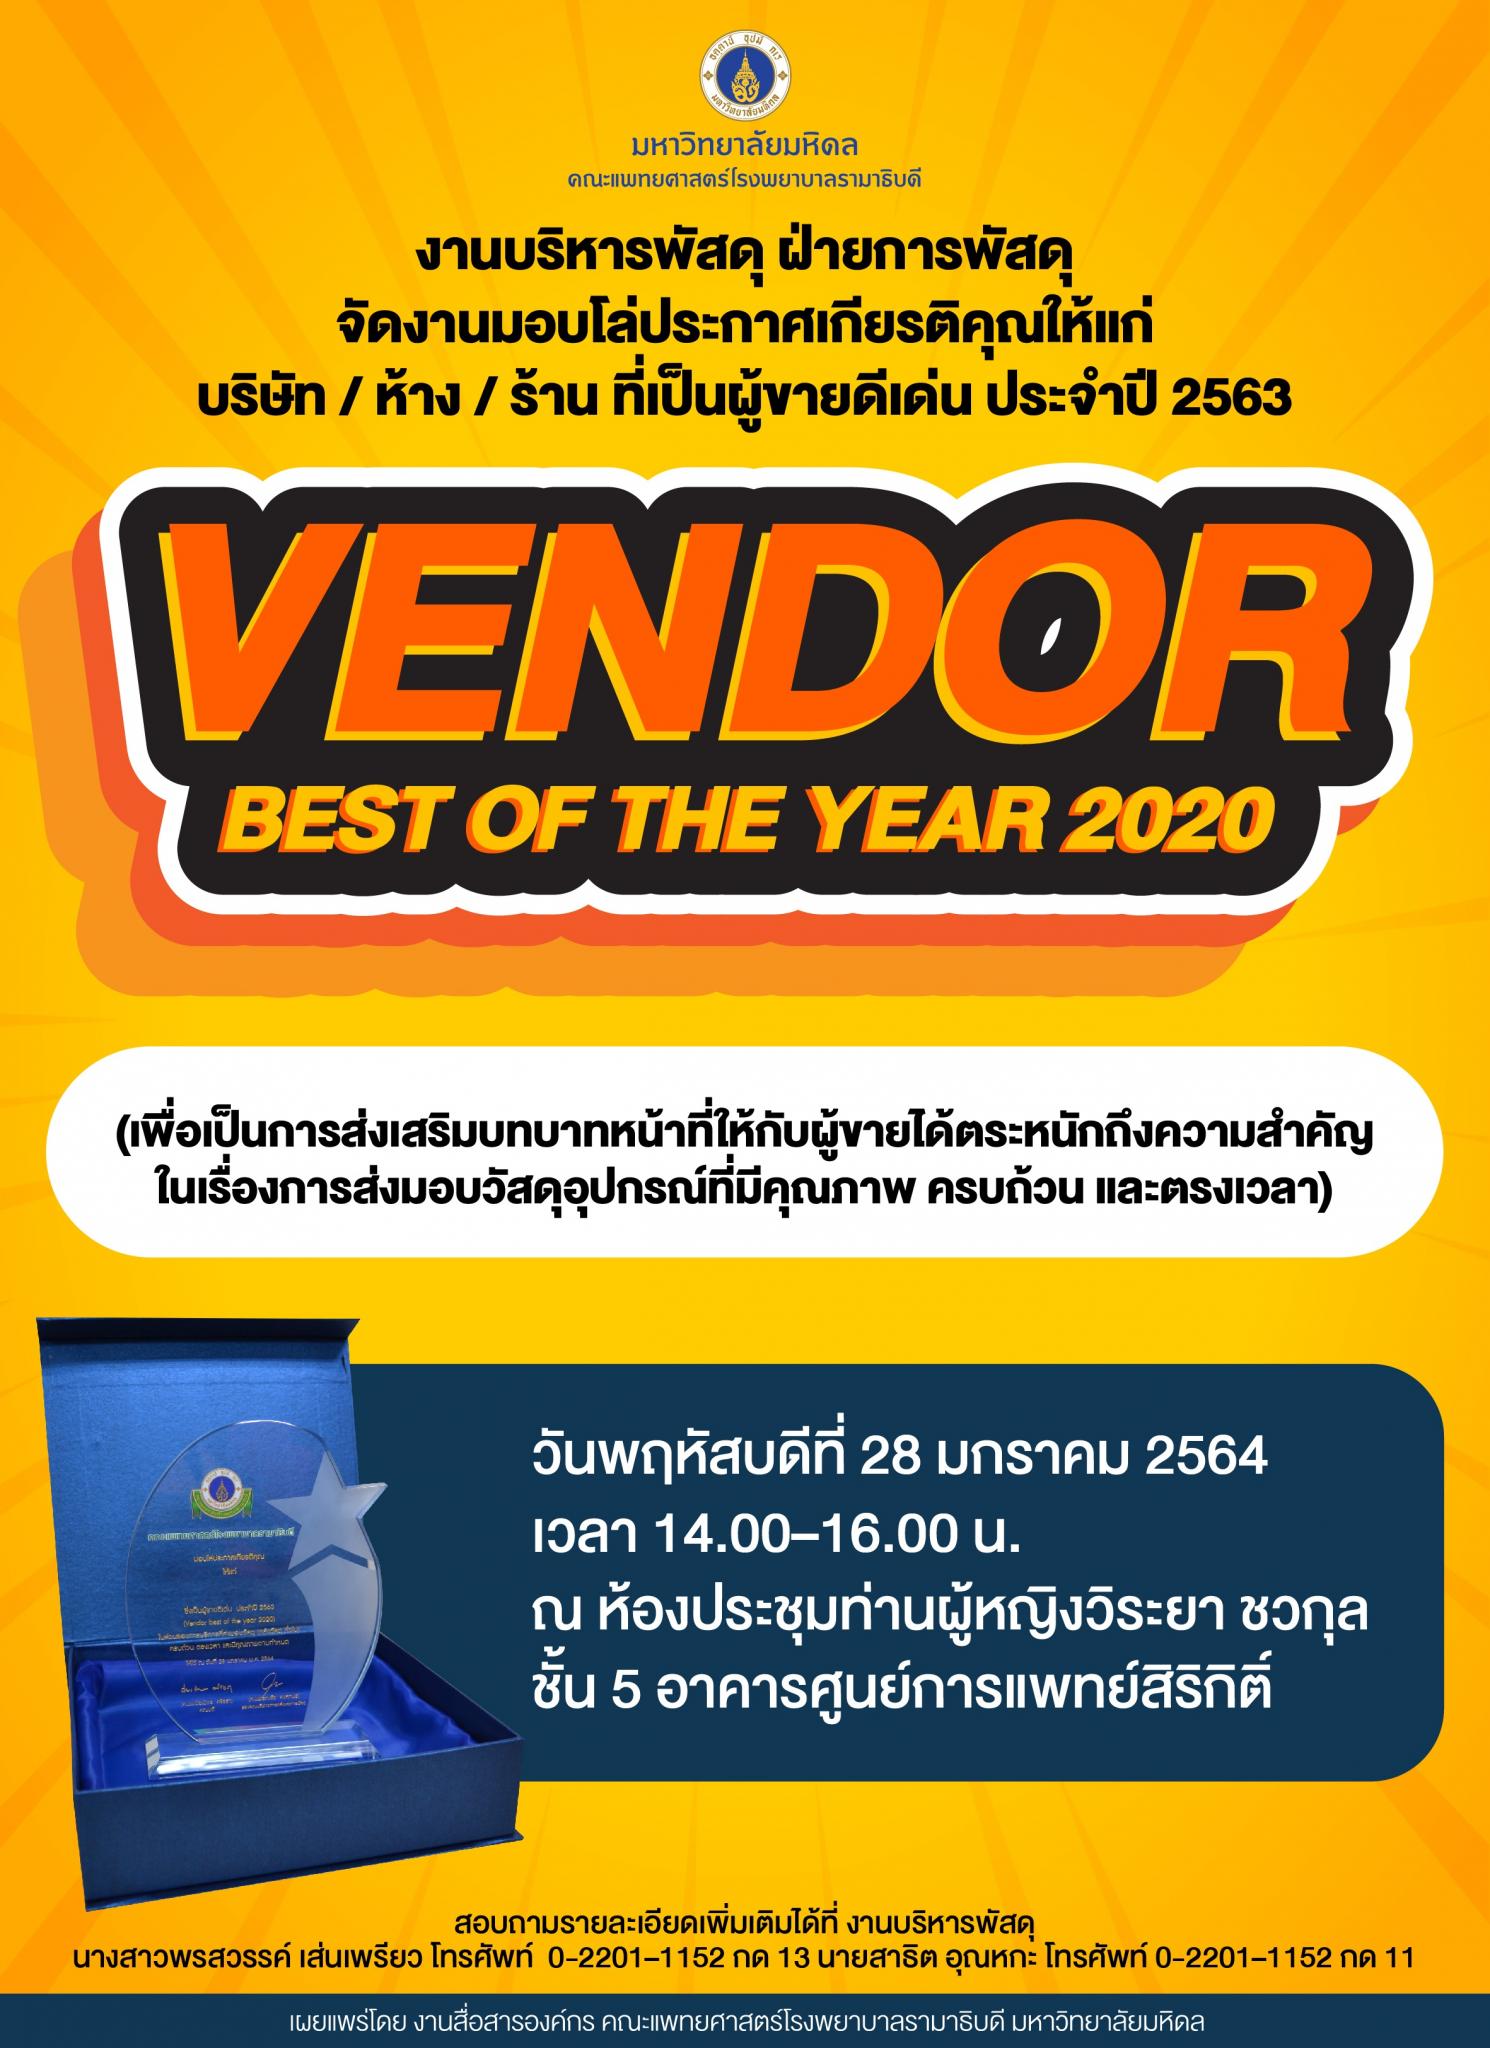 VENDOR BEST OF THE YEAR 2020